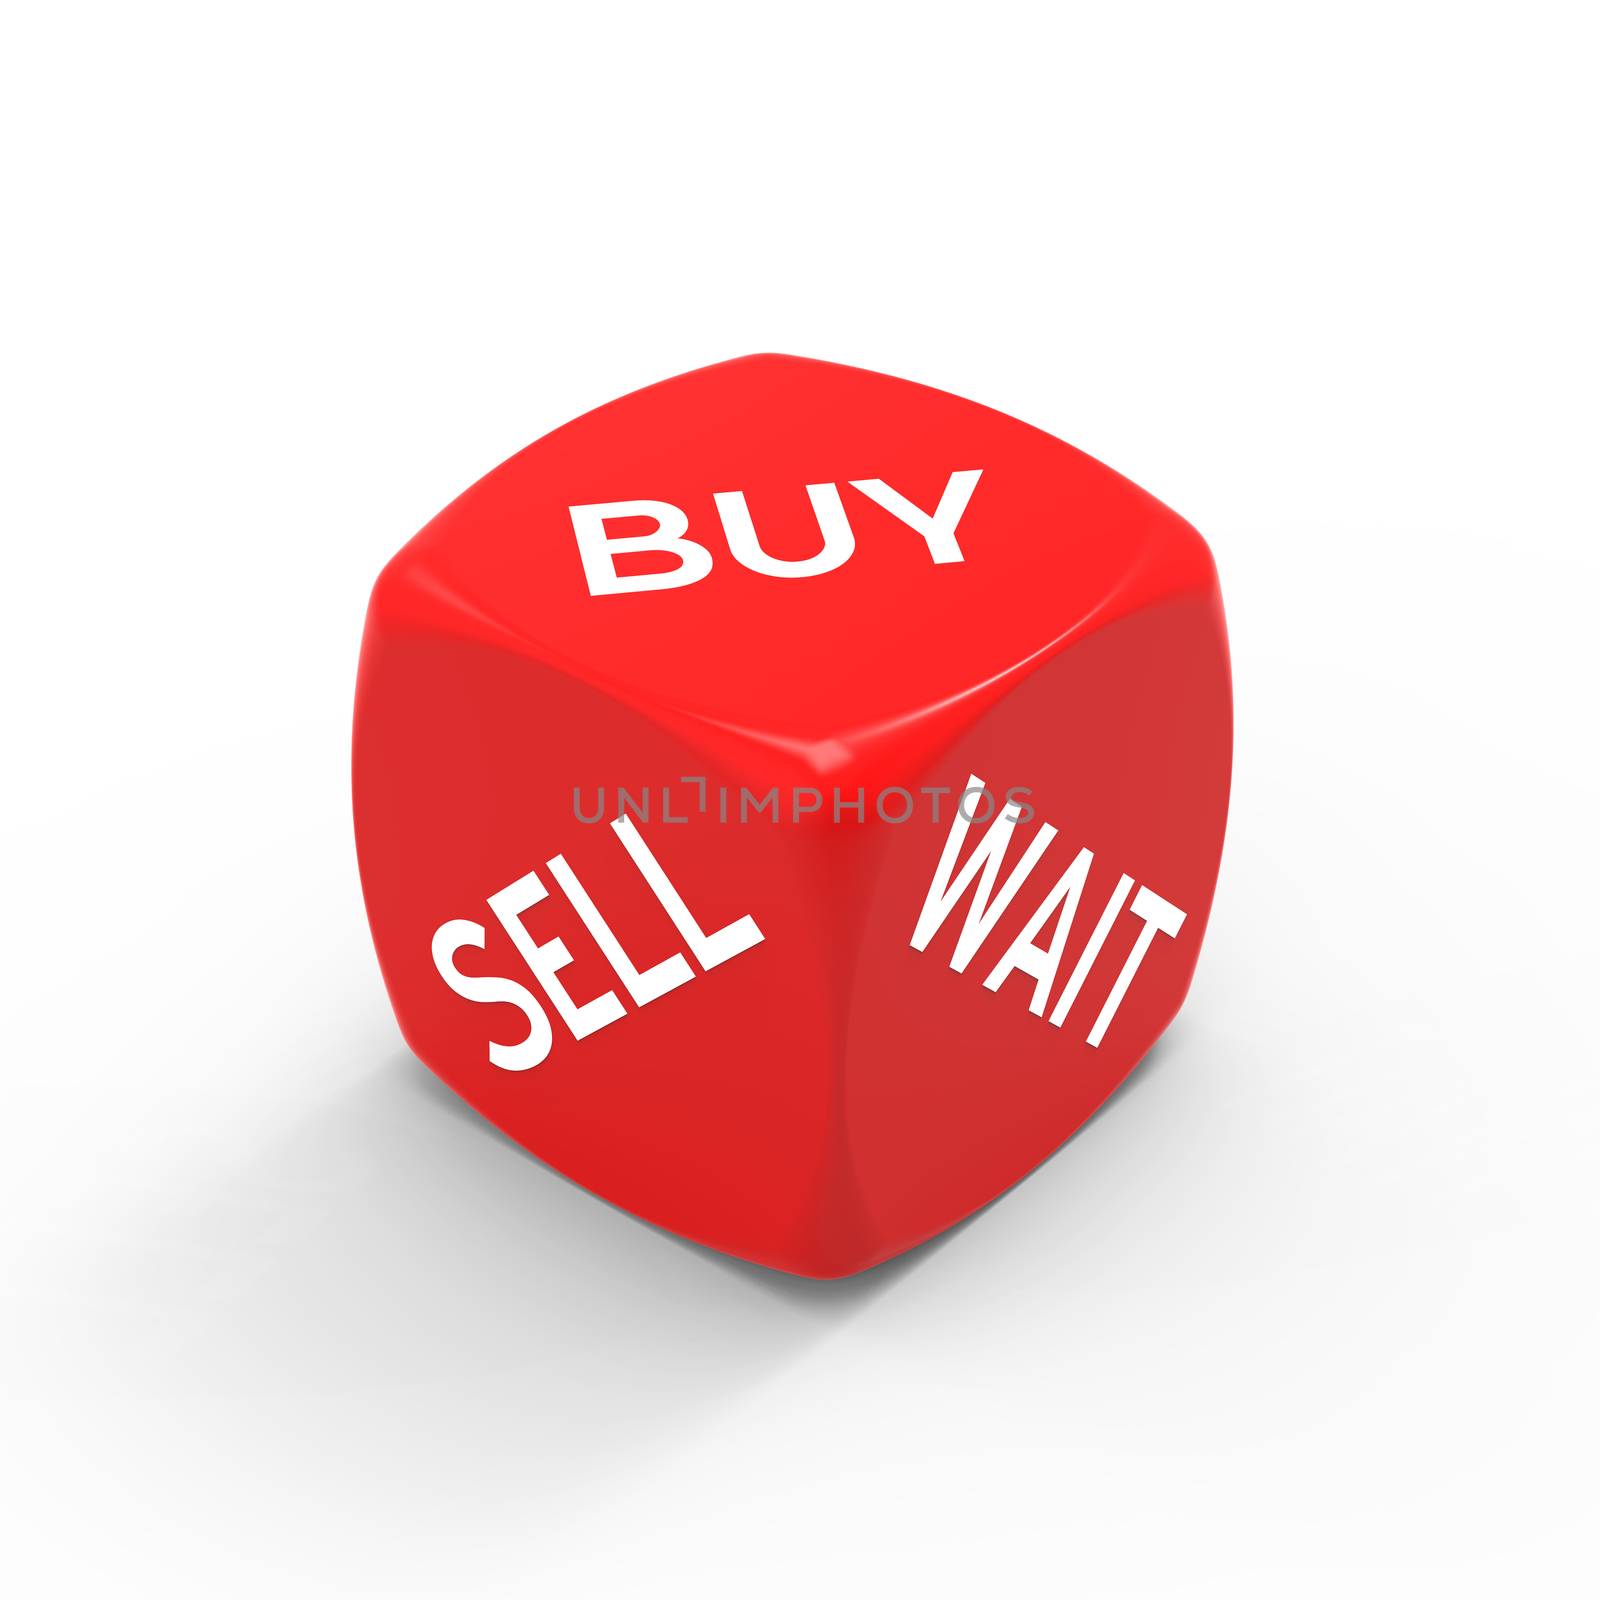 Buy or sell - how to make the right decision.